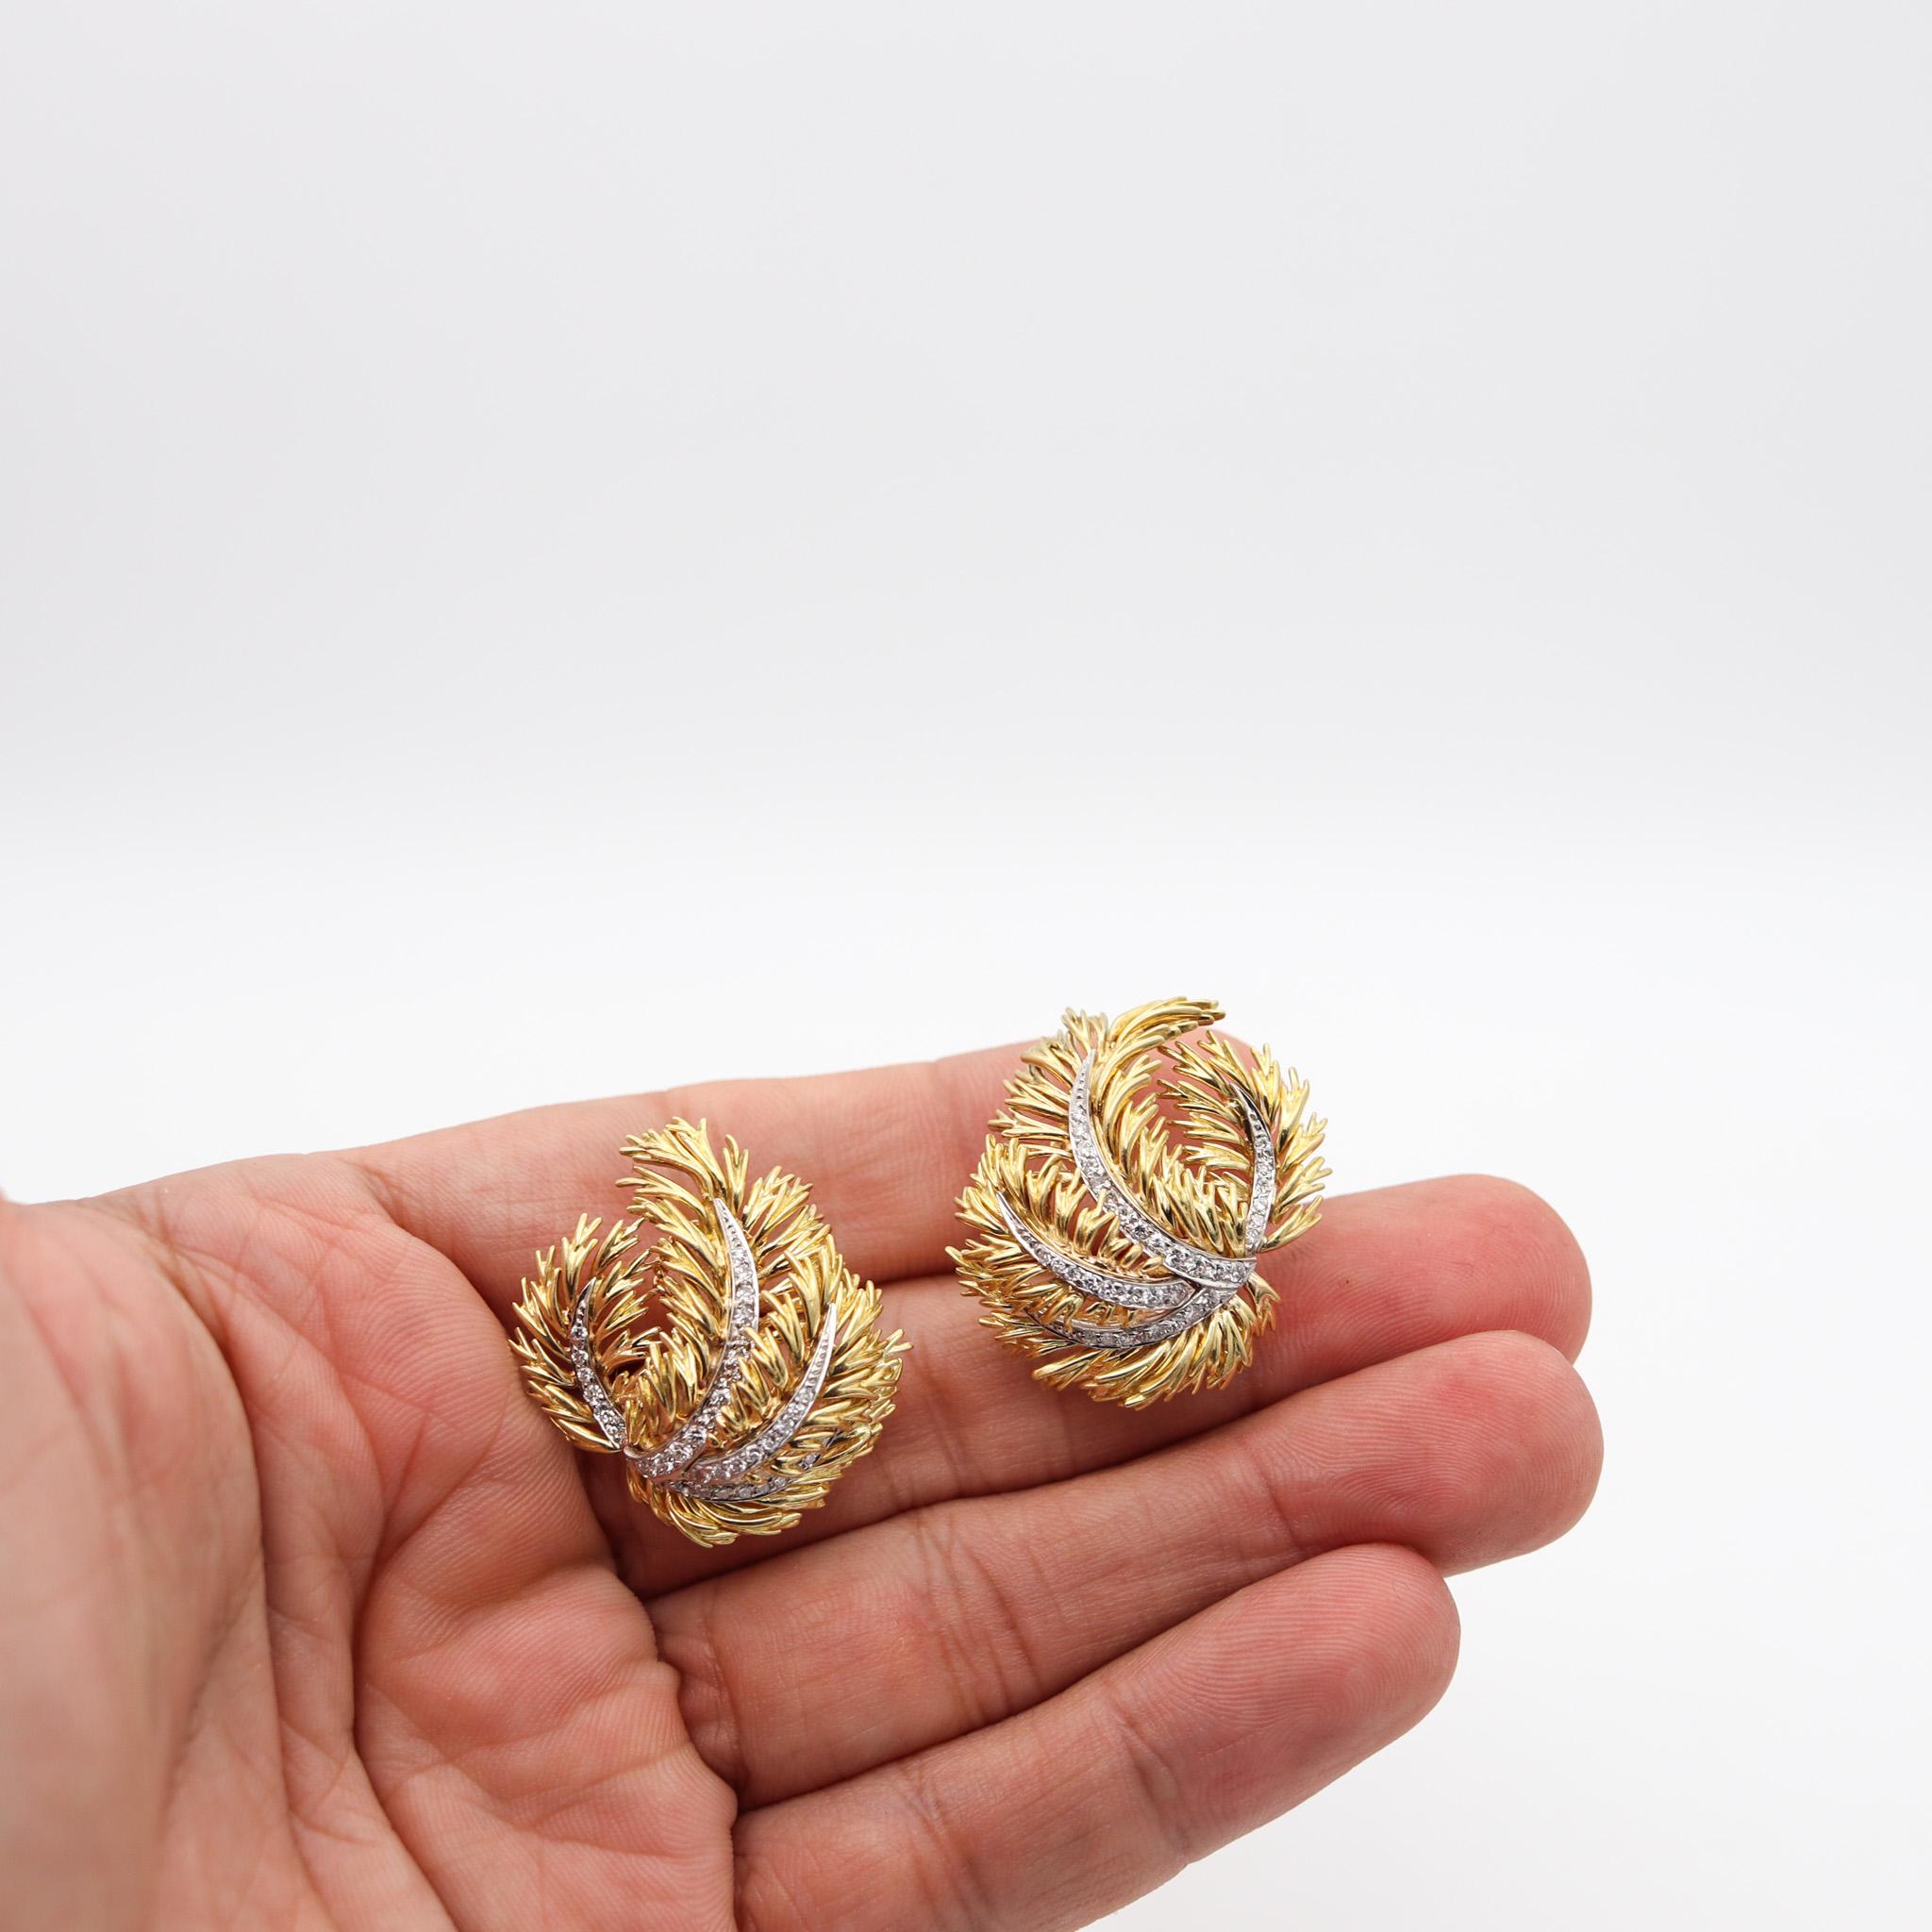 Cartier 1960 Clips Earrings In 18Kt Yellow Gold With 1.76 Ctw In VS Diamonds 1